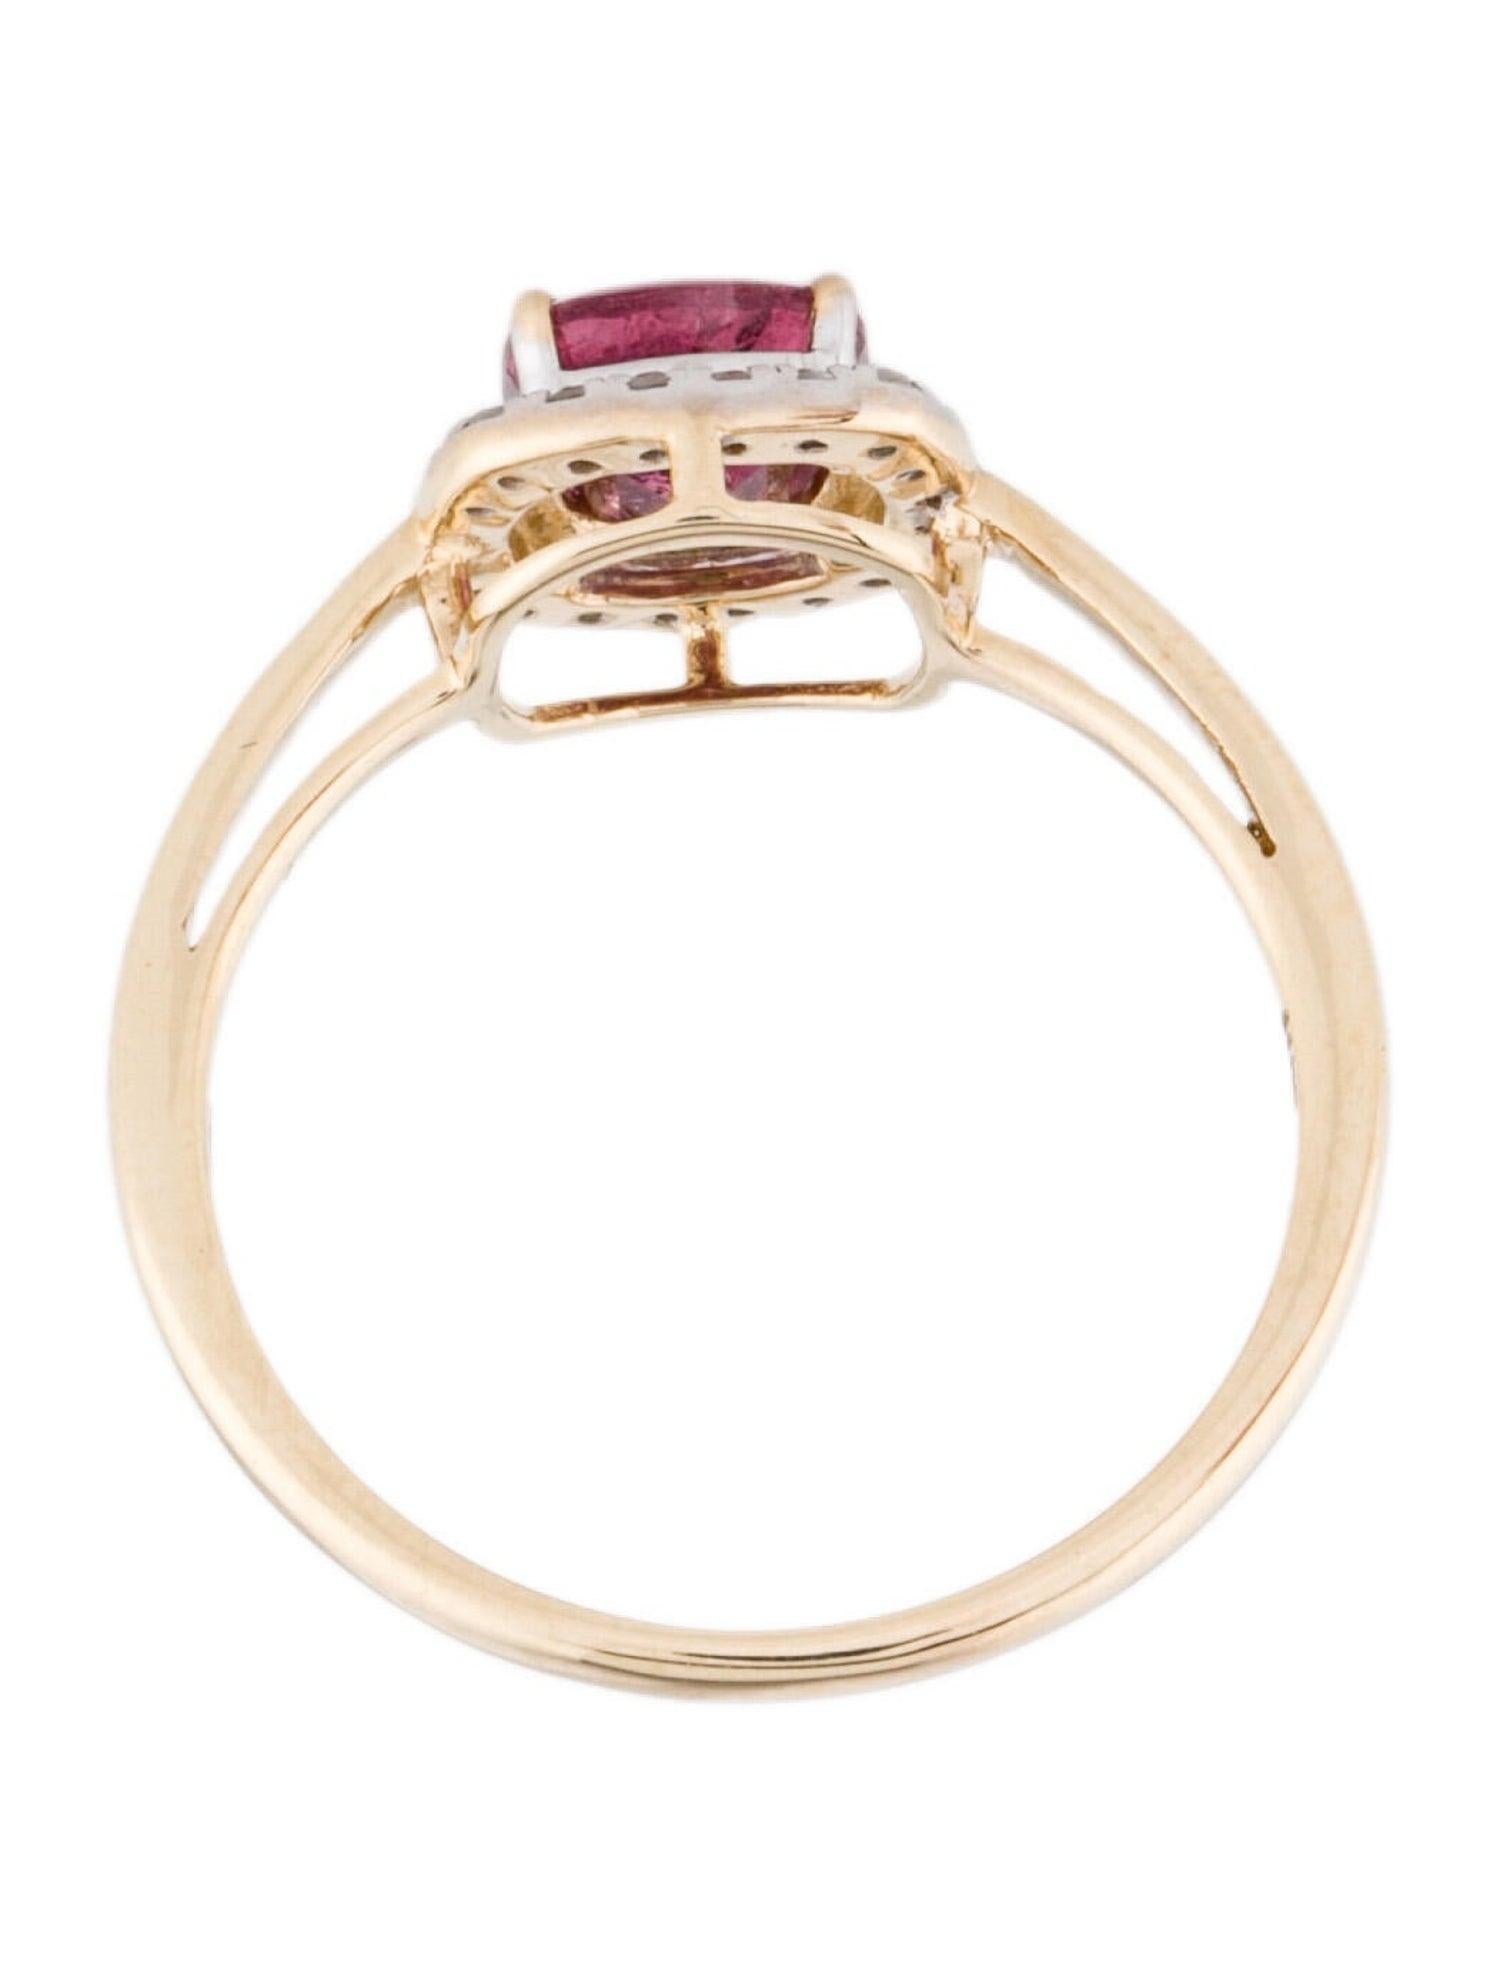 Exquisite 14K Tourmaline & Diamond Cocktail Ring - Size 6.75 - Timeless Luxury In New Condition For Sale In Holtsville, NY